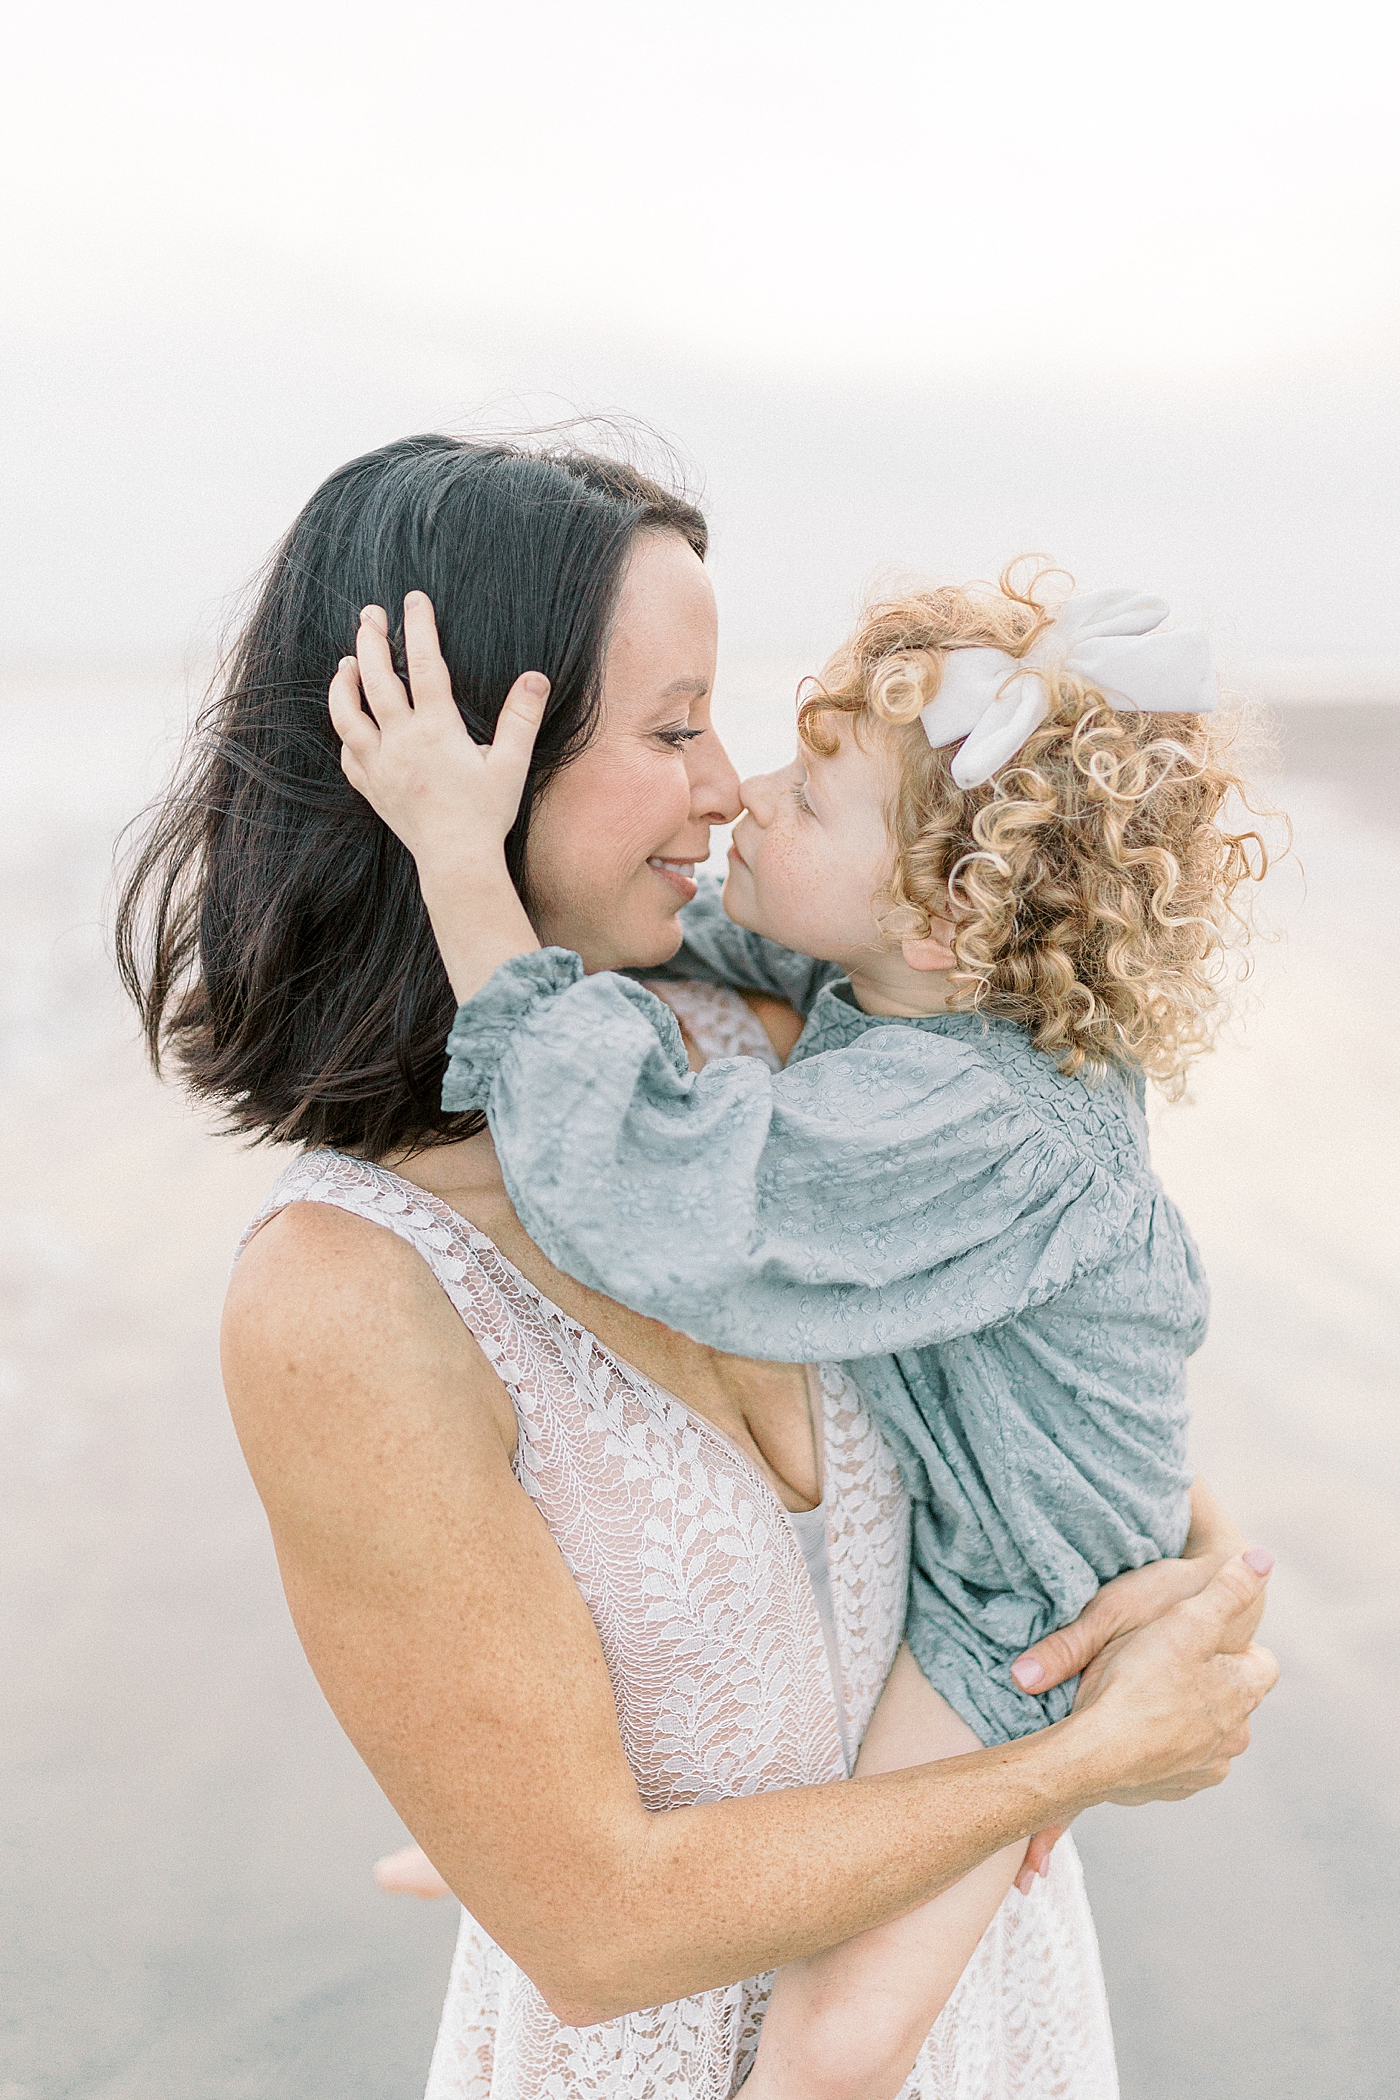 Mom and daughter snuggling during fall family session at beach | Photo by Caitlyn Motycka Photography